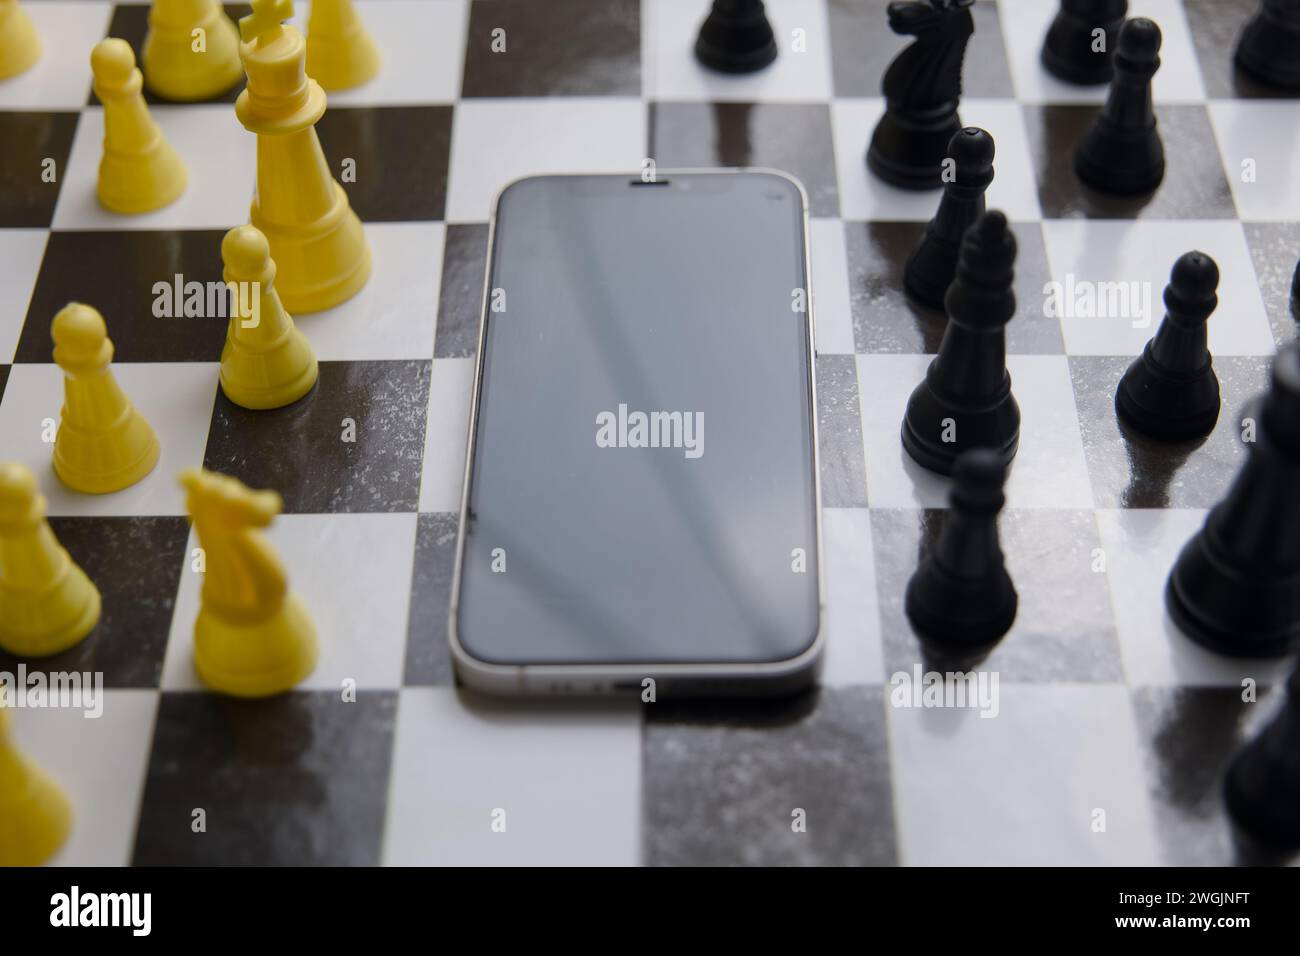 A captivating close-up of a chess game in progress on a smartphone screen Stock Photo